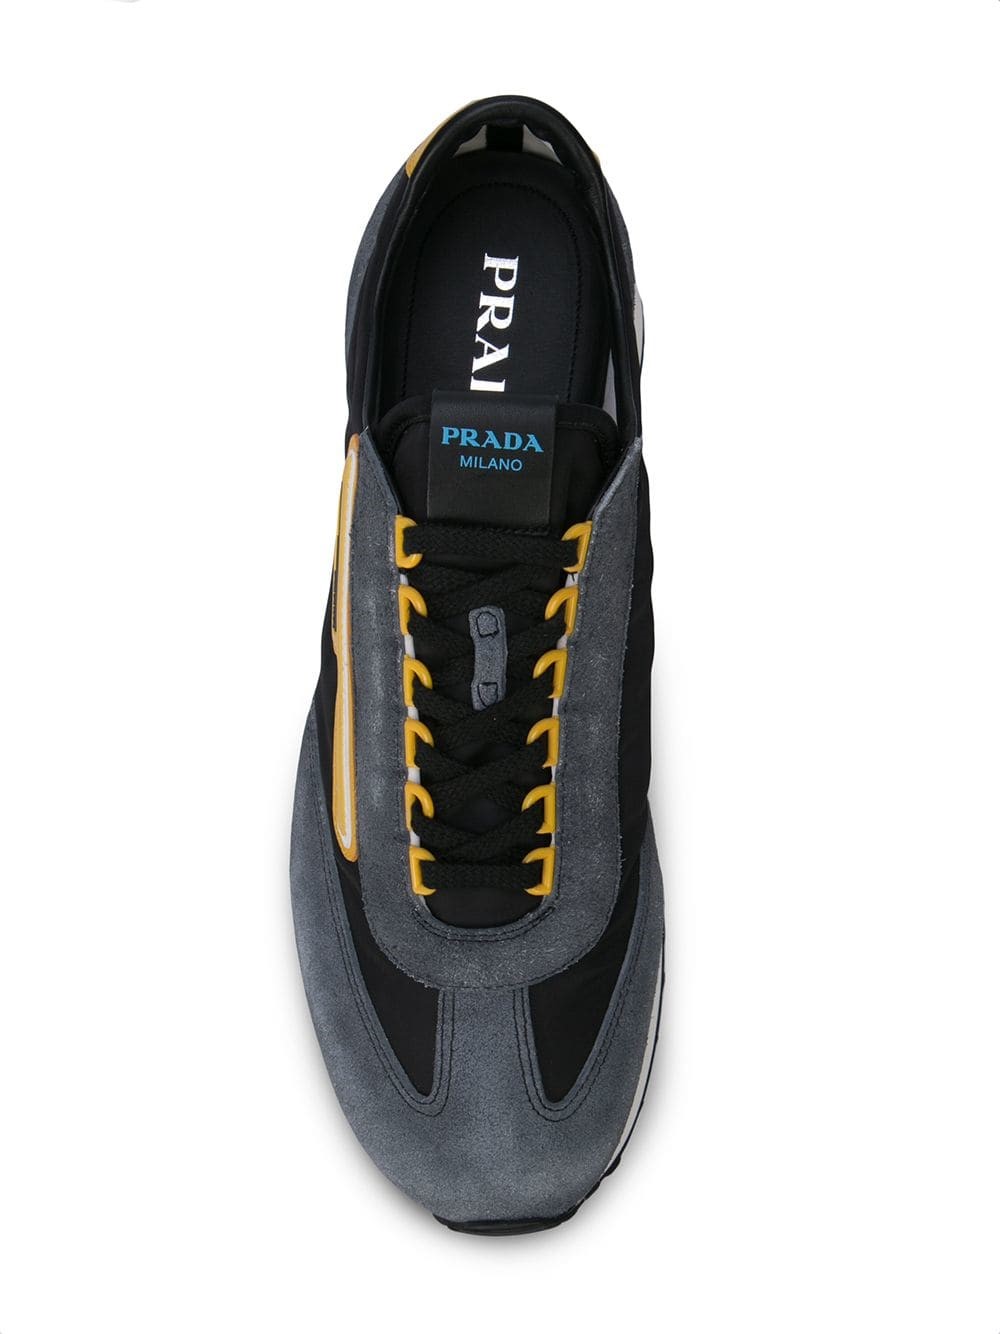 prada MLN70 SNEAKERS available on  - 26876